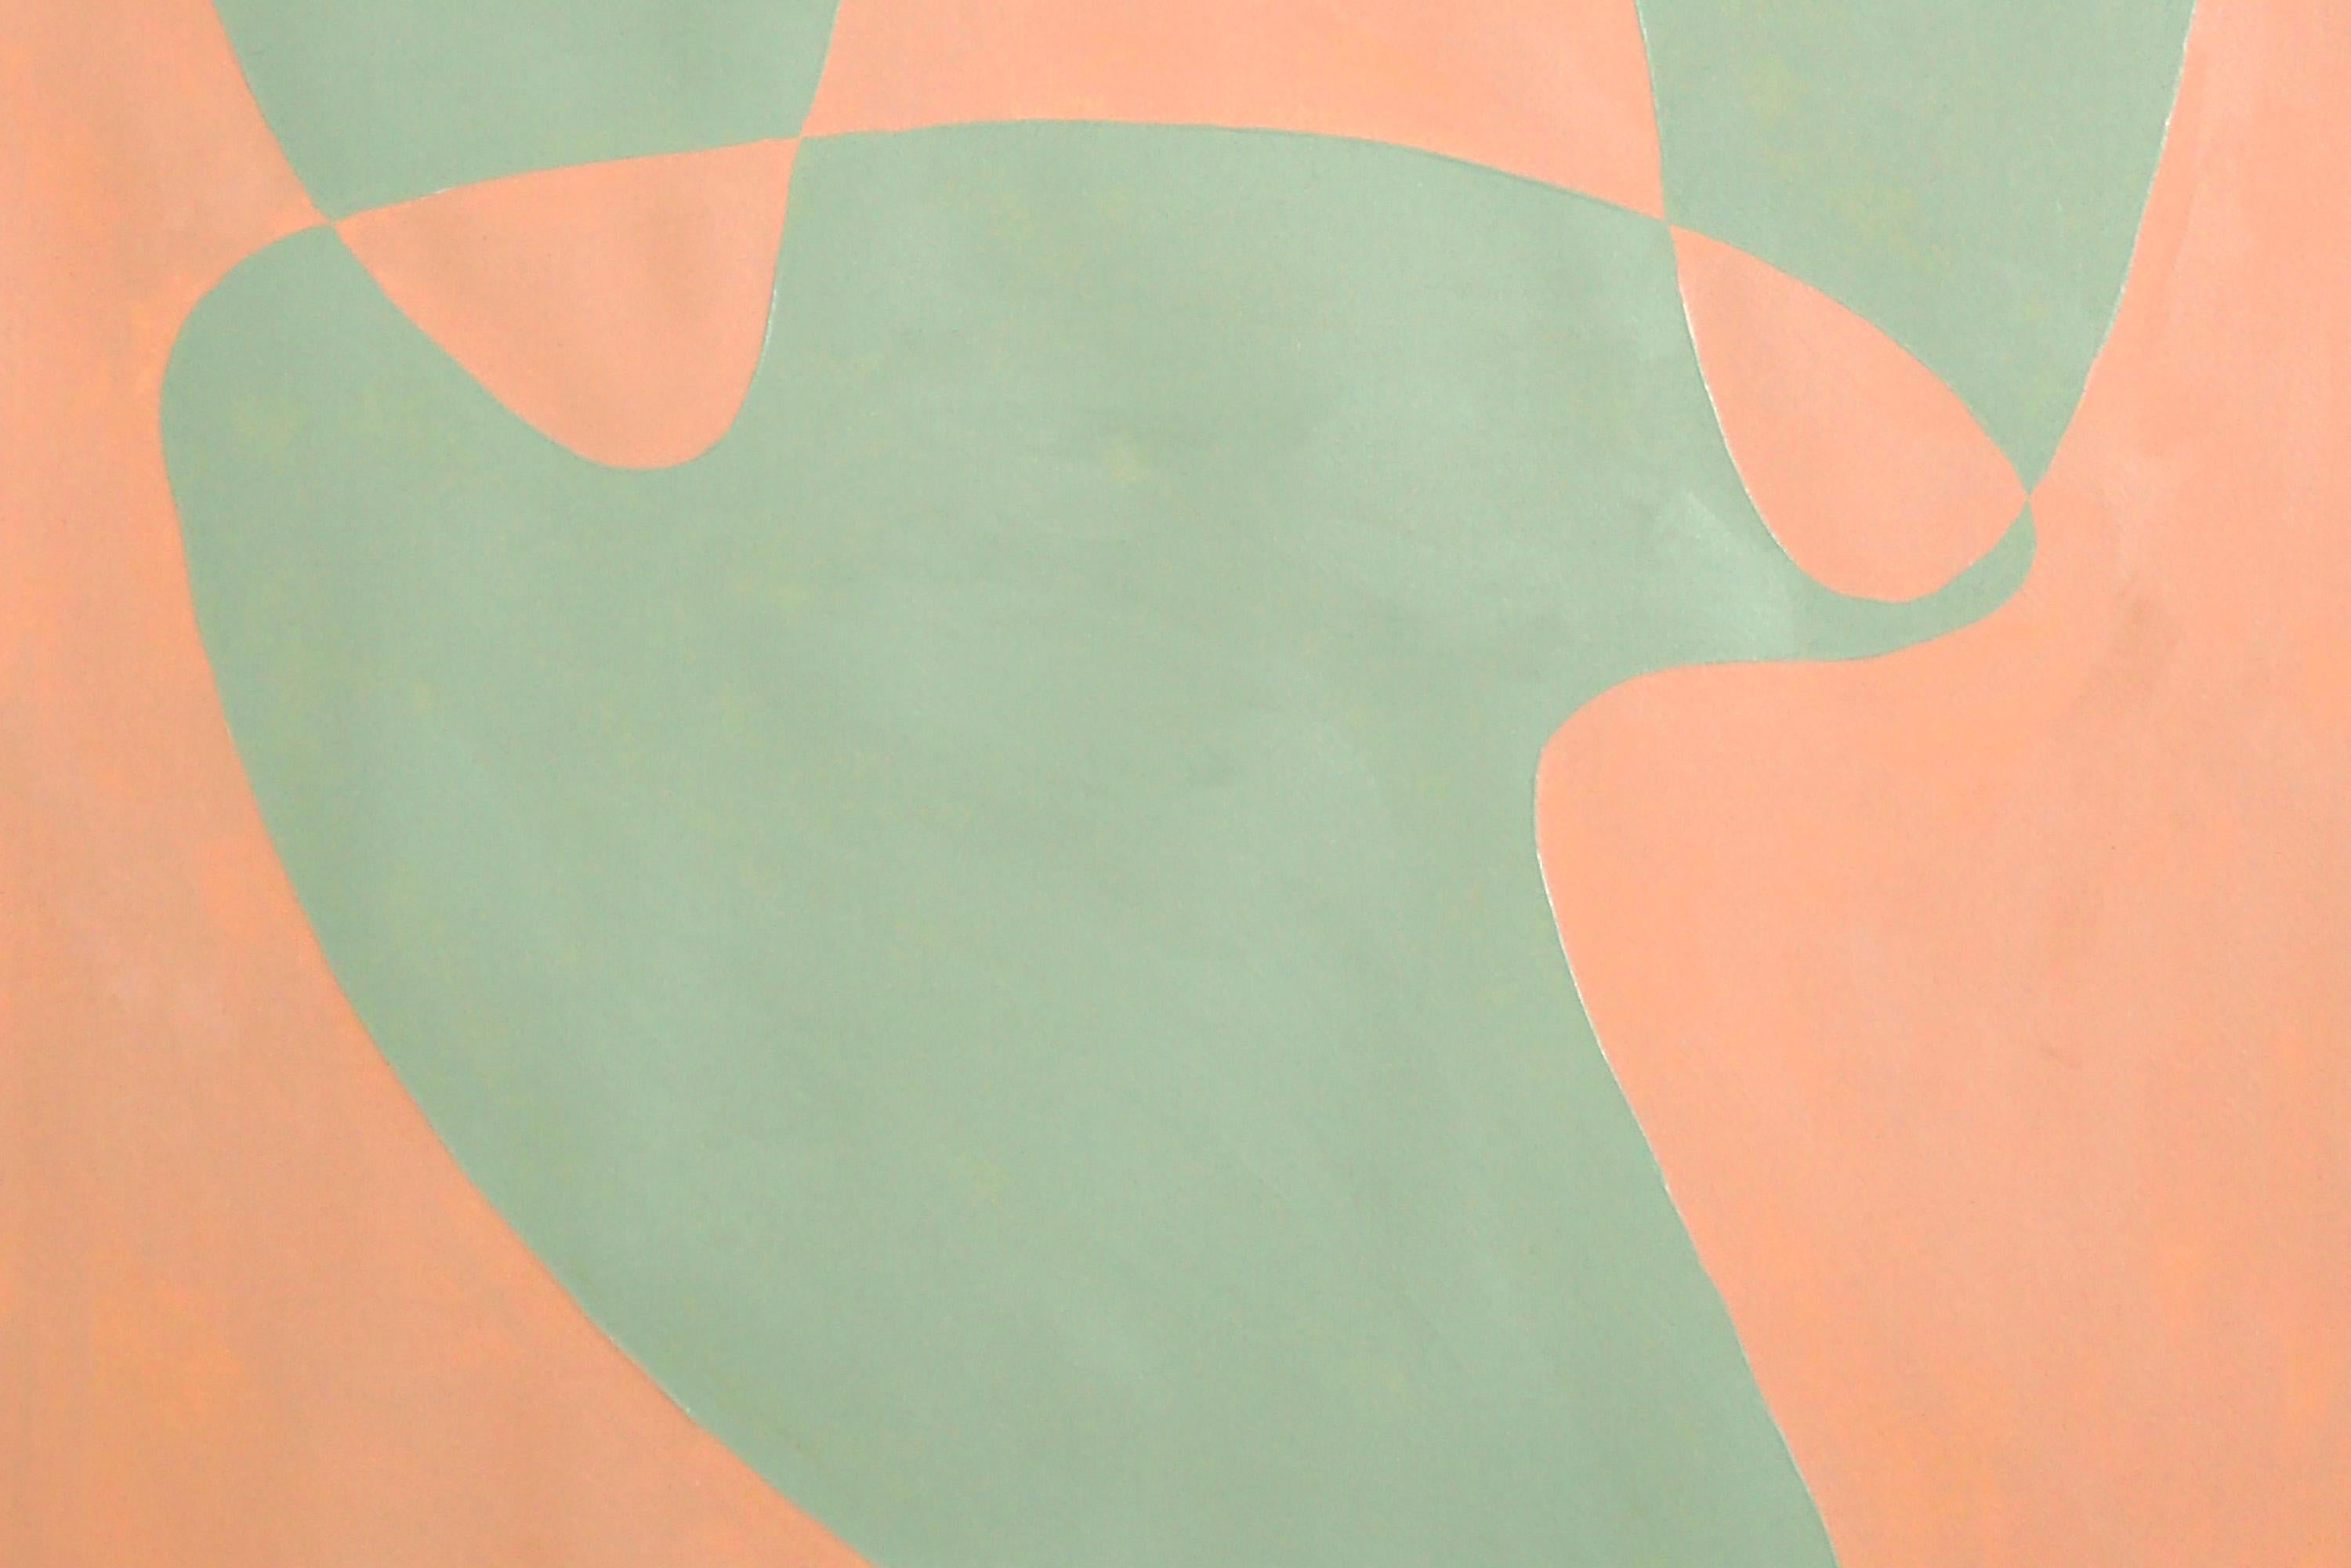 Bodies Moving Slowly, Abstract Figures Duo, Green and Tan, Pastel Tones Diptych 4